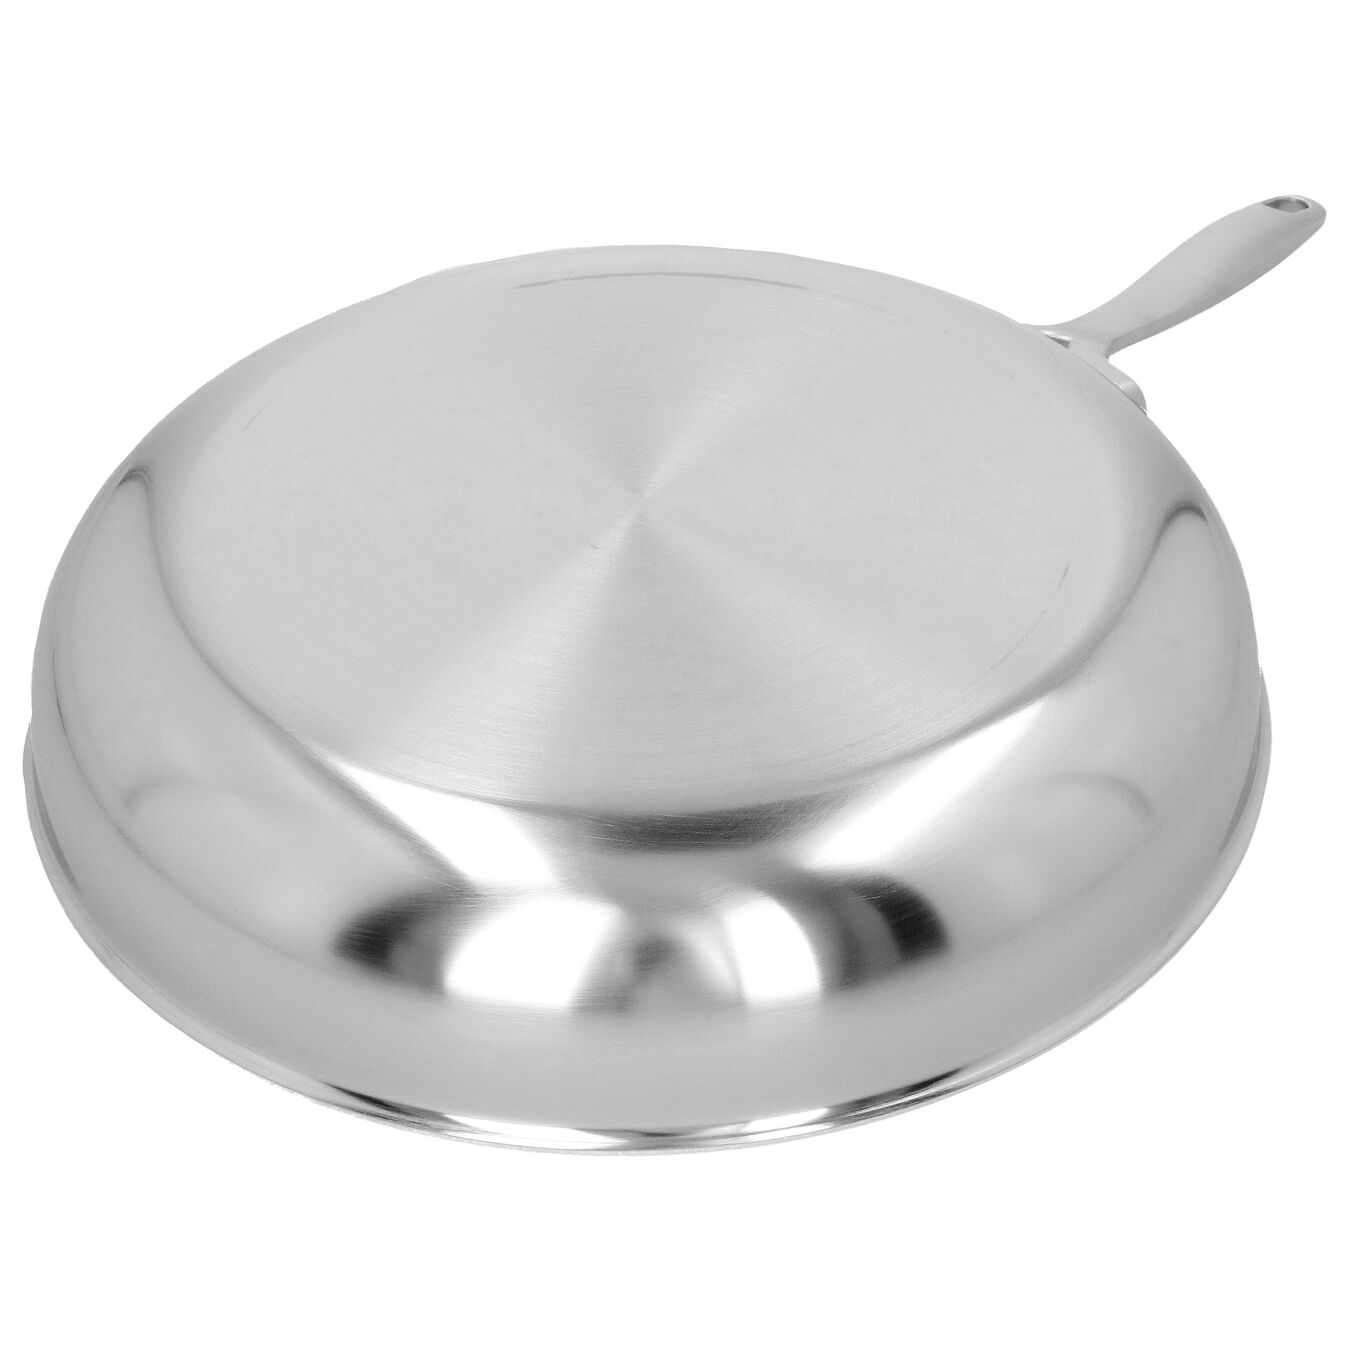 11-inch, 18/10 Stainless Steel, Frying pan,,large 2